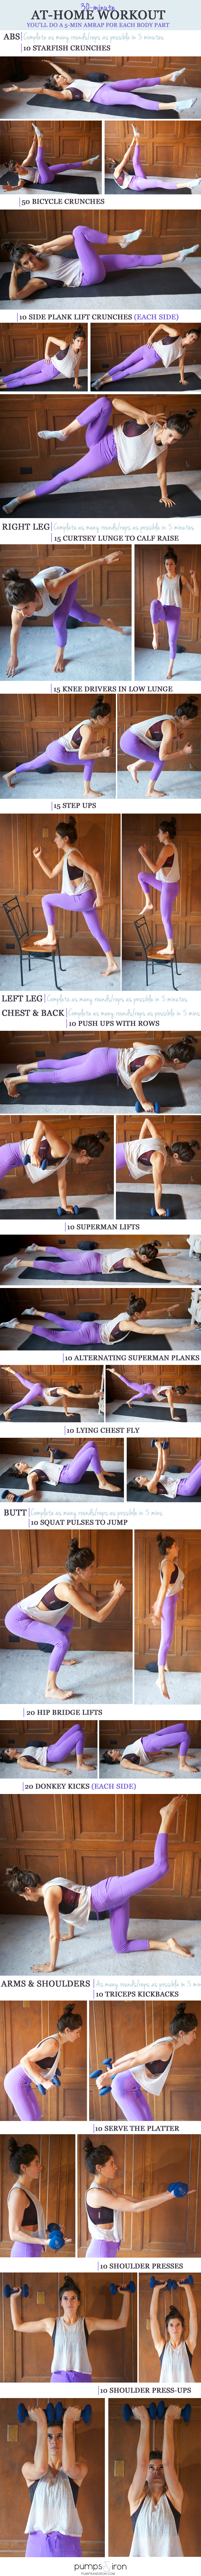 30-Minute At-Home Workout — youll spend 5 minutes on each body part